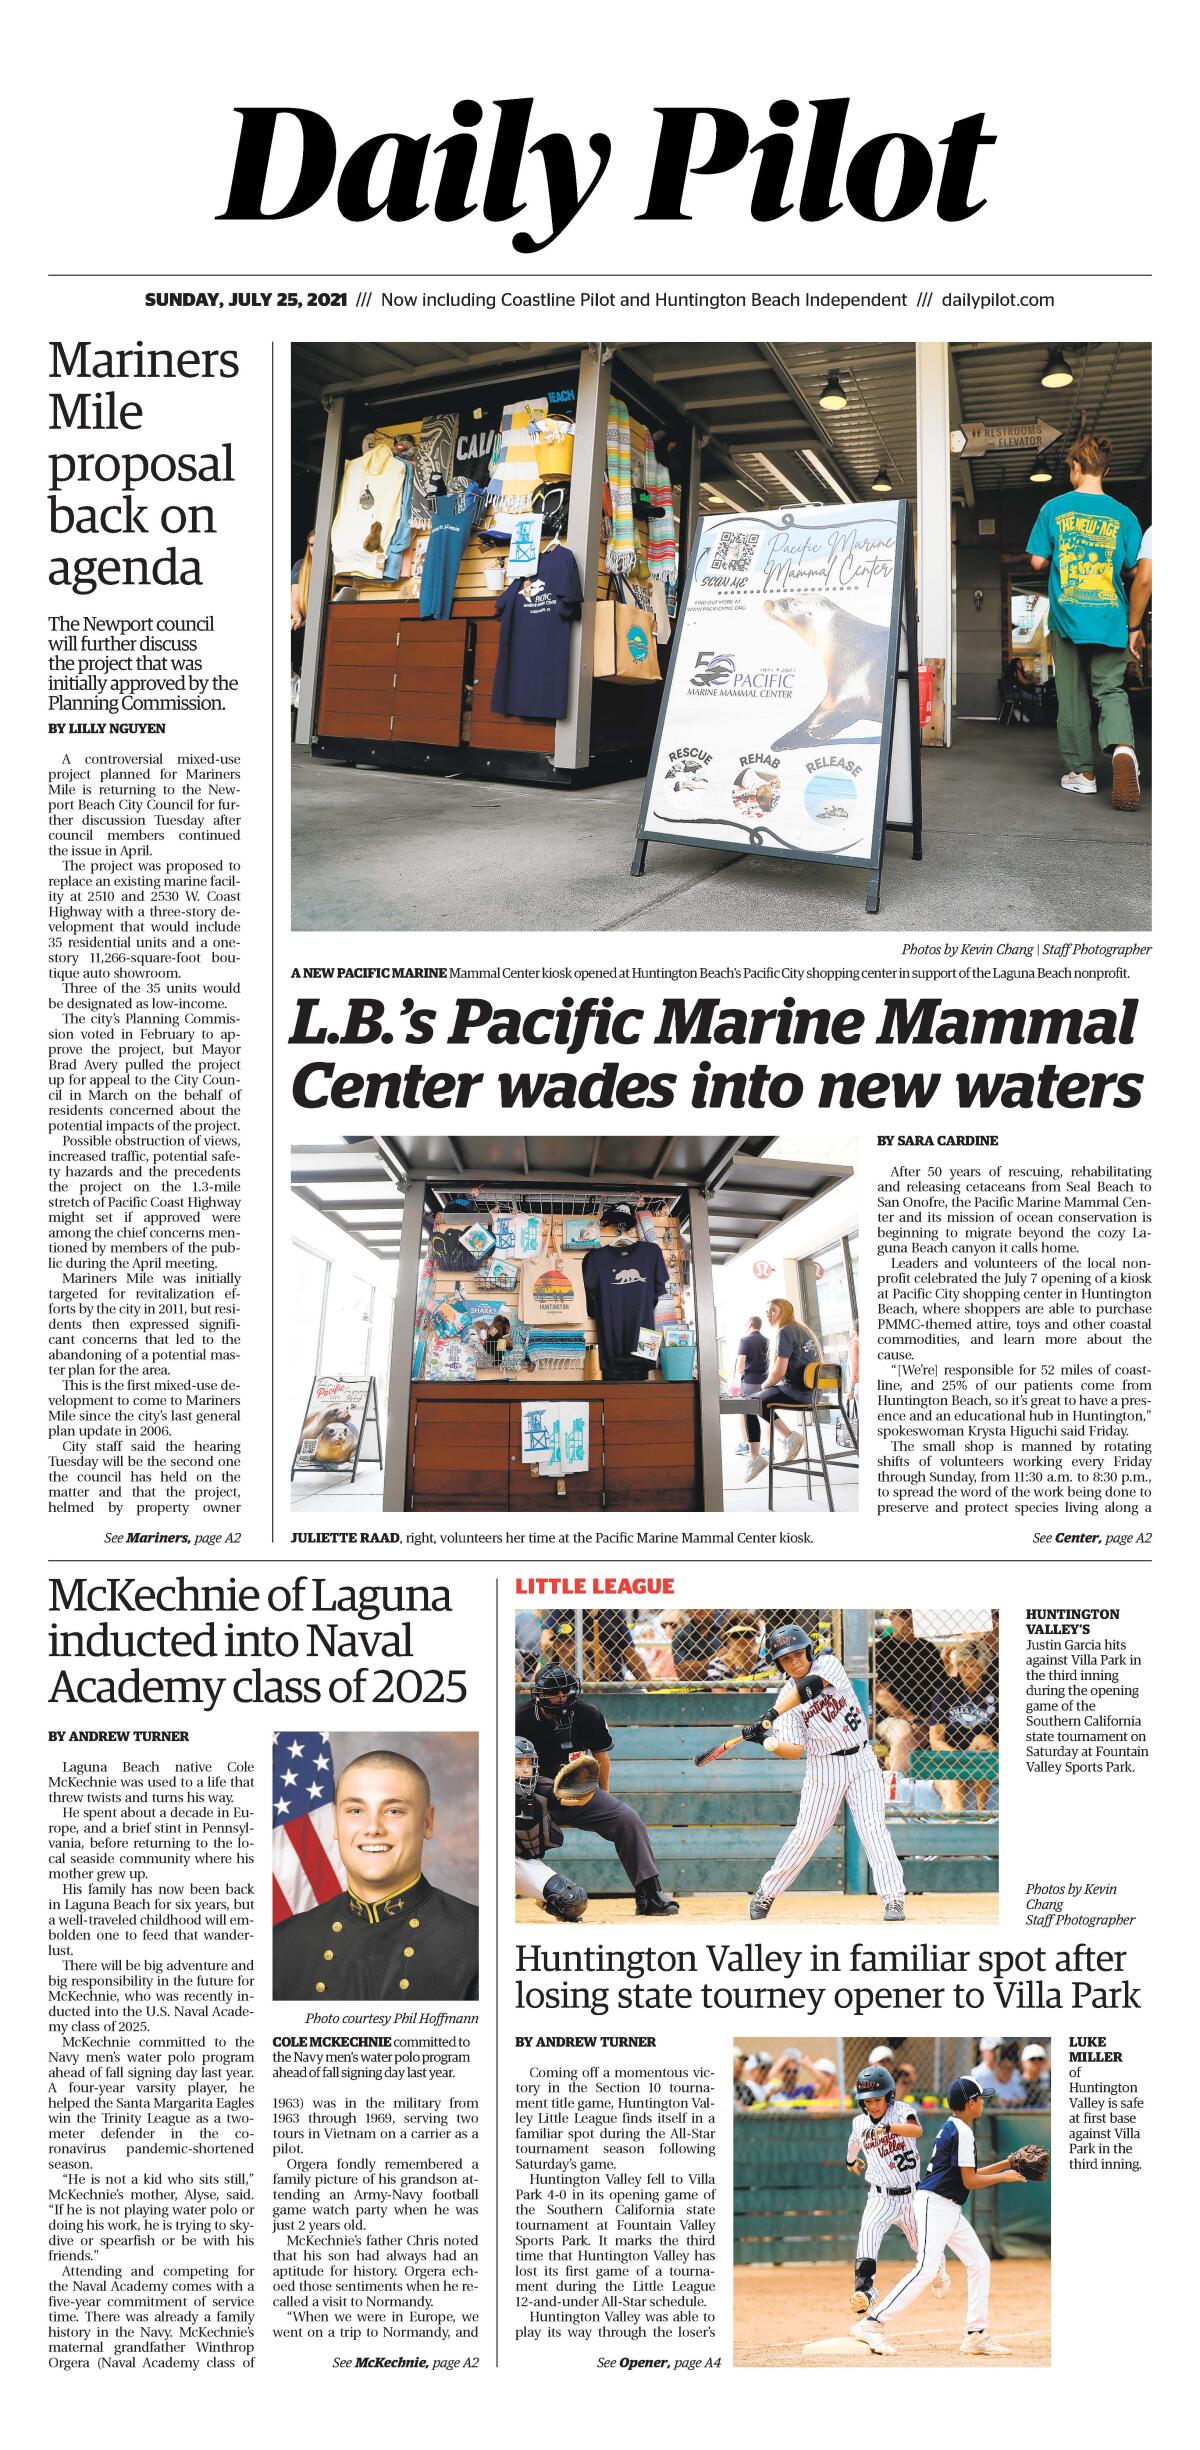 Front page of Daily Pilot e-newspaper for Sunday, July 25, 2021.